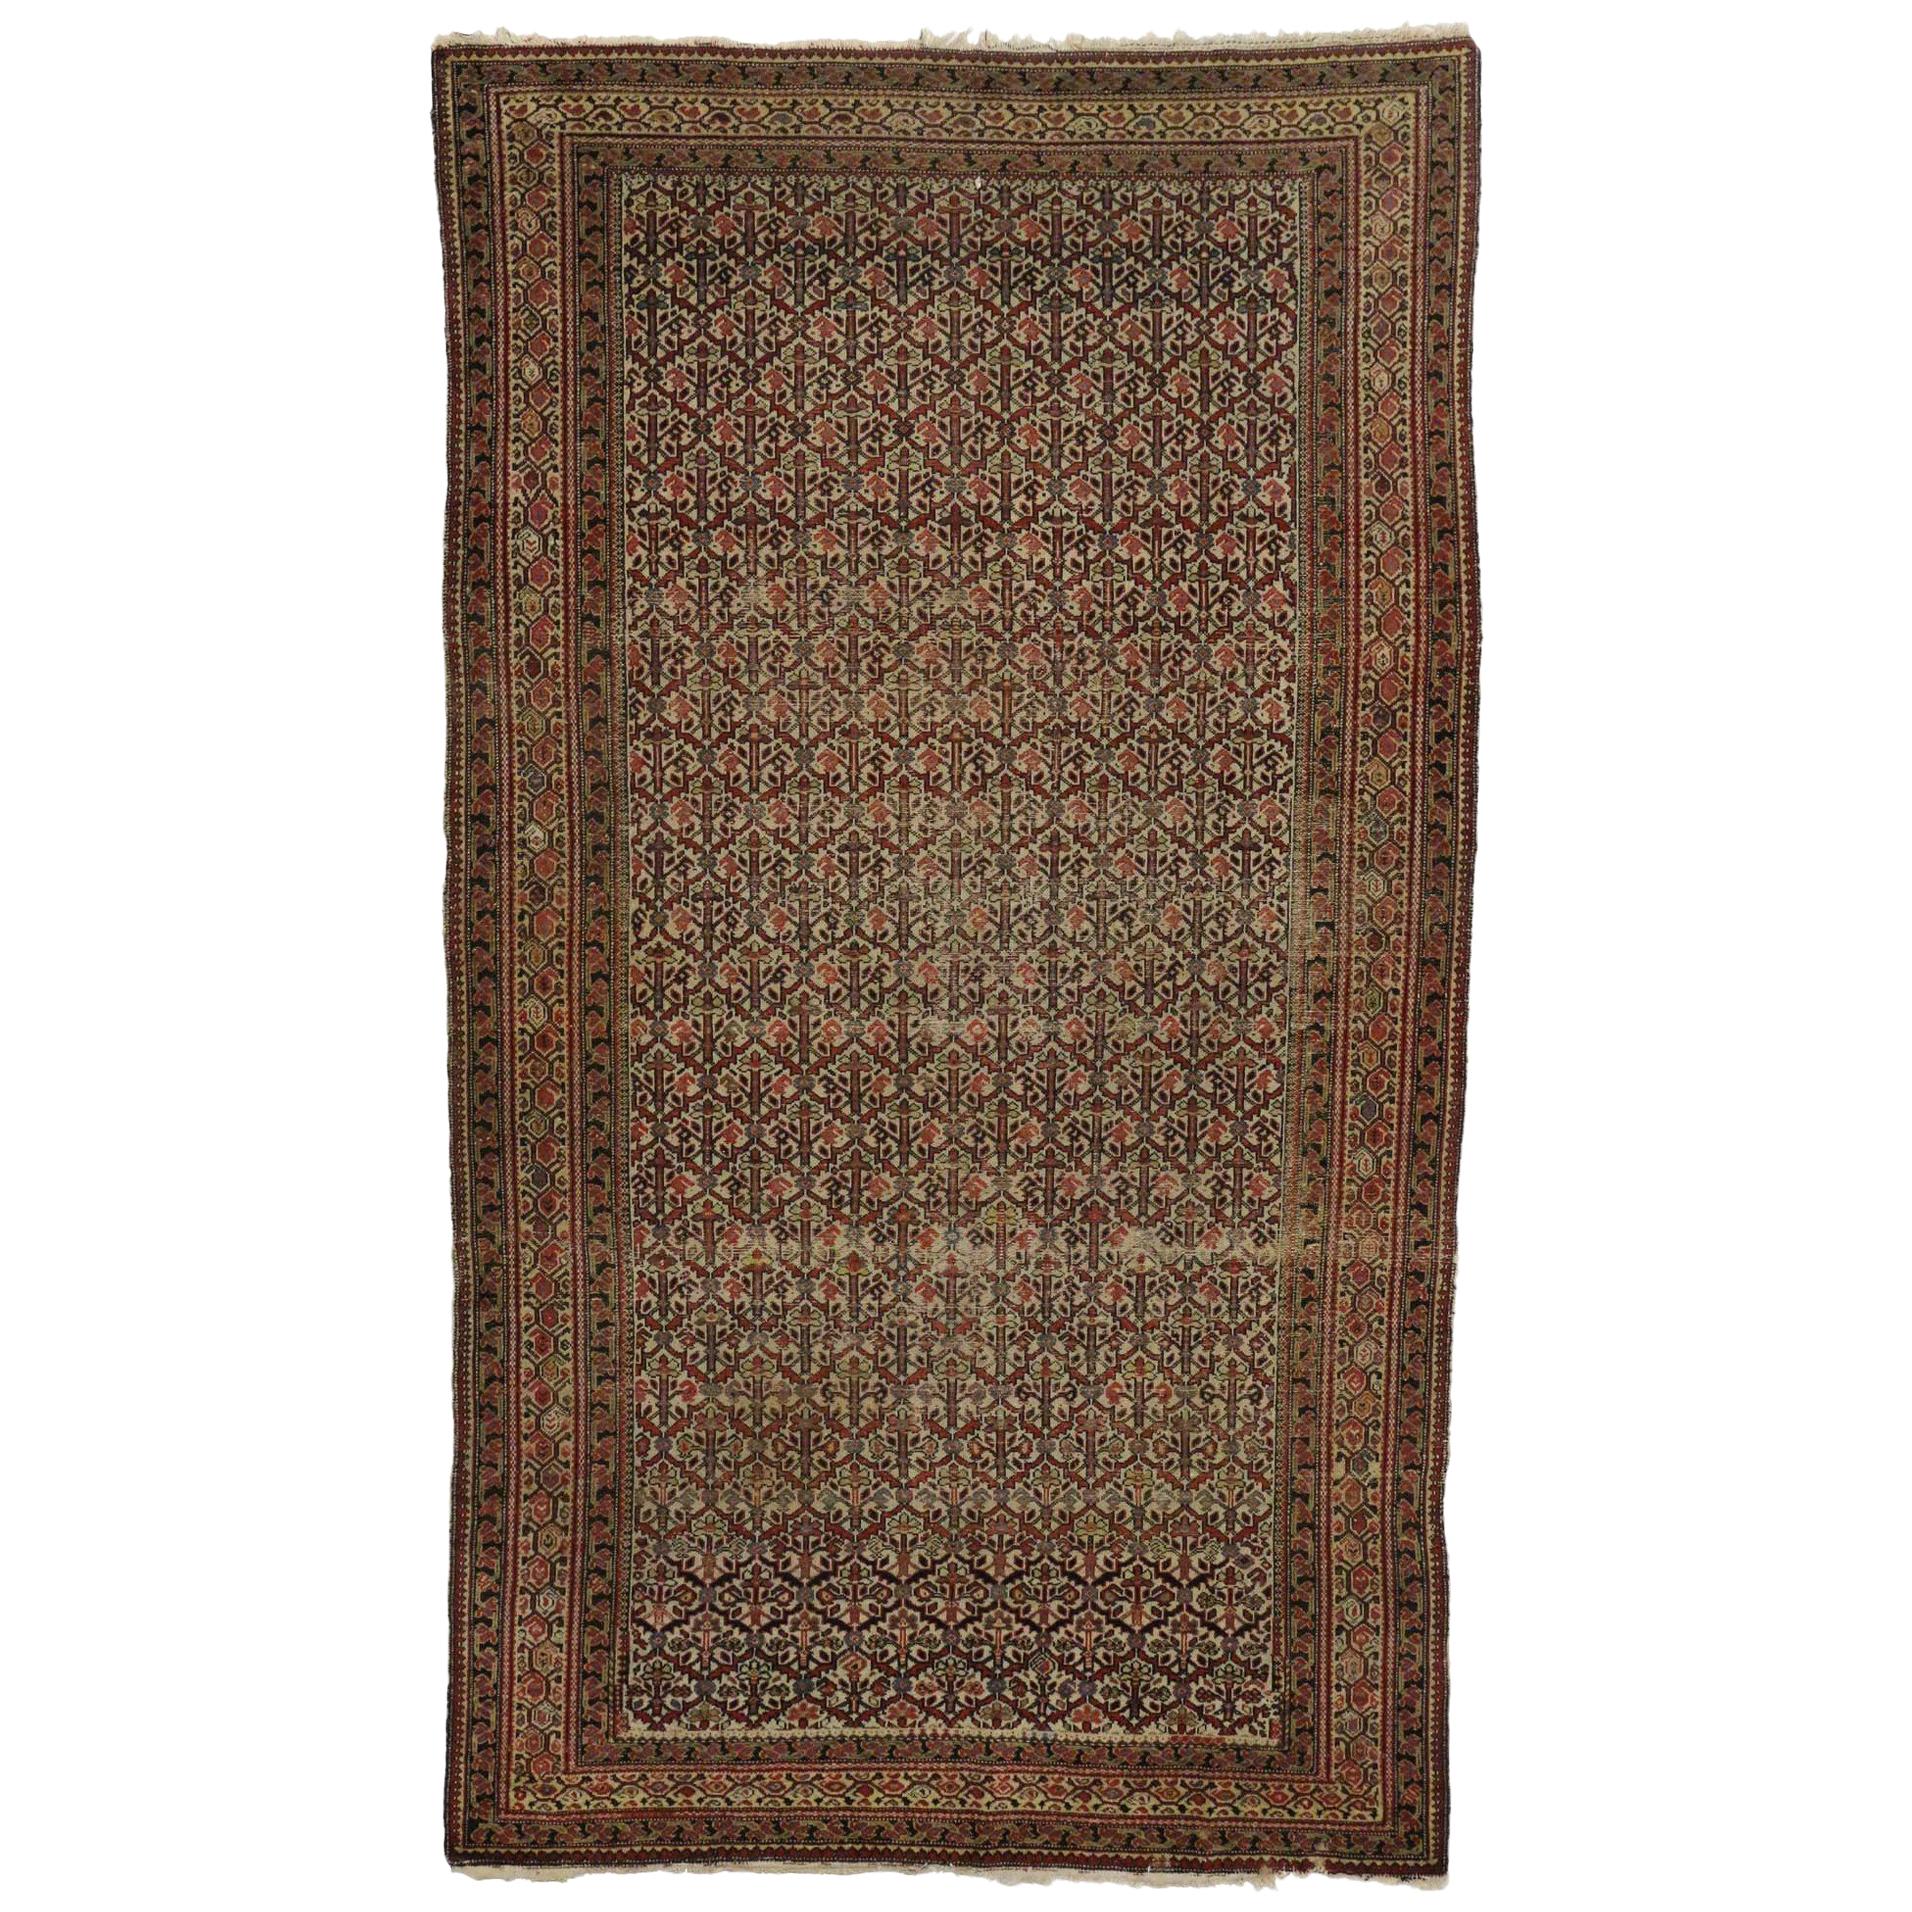 Distressed Antique Malayer Persian Area Rug with Industrial Rustic Style